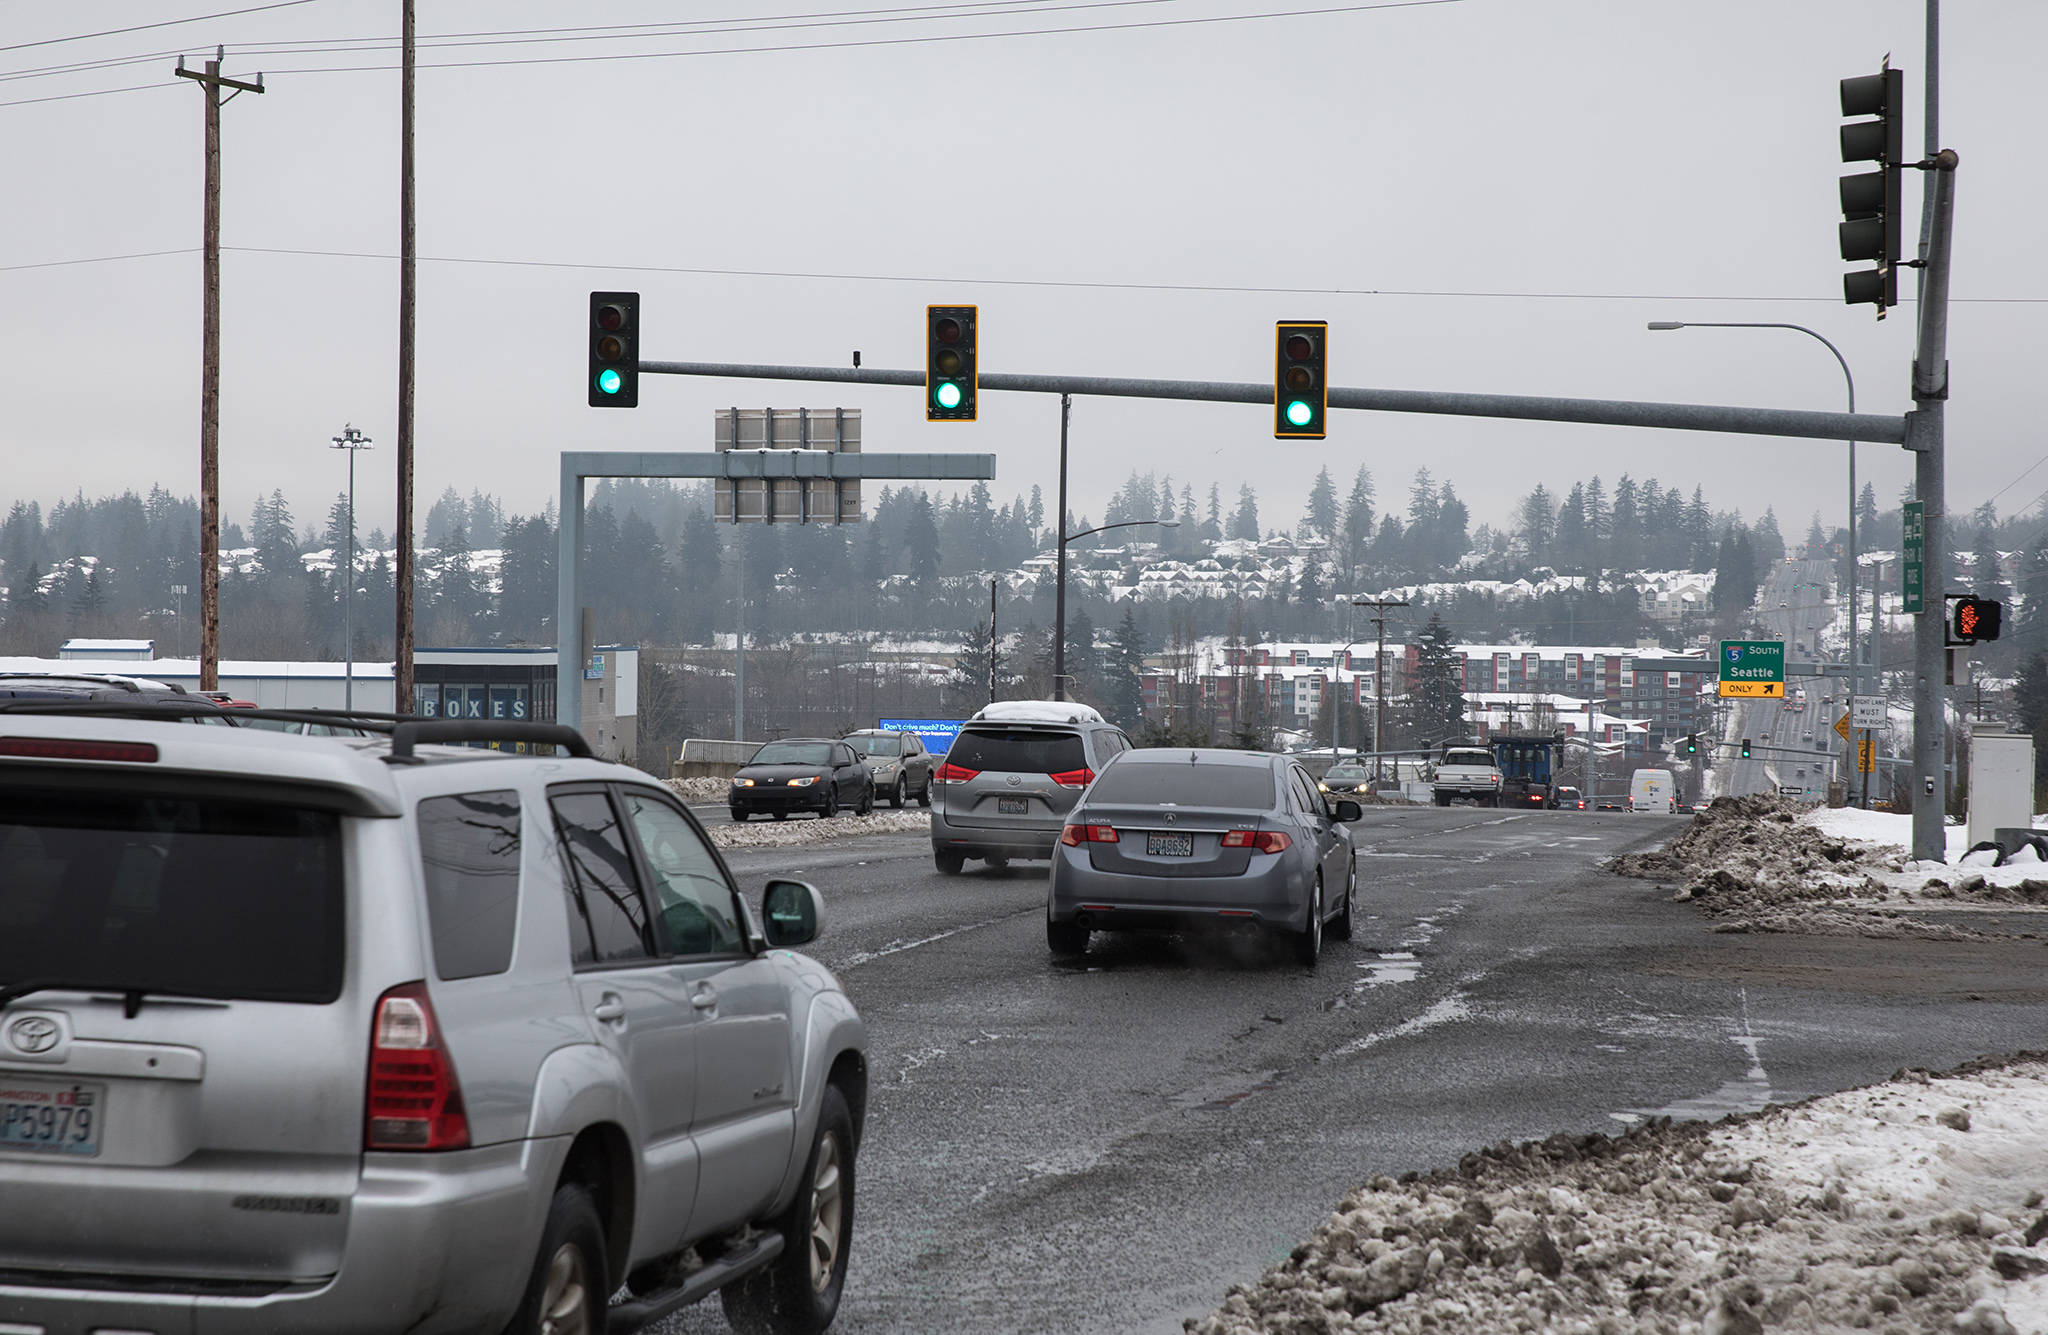 Vehicles exiting I-5 compete for space with the traffic on 164th Street SW often causing congestion even during non-rush hour times. (Lizz Giordano / The Herald)